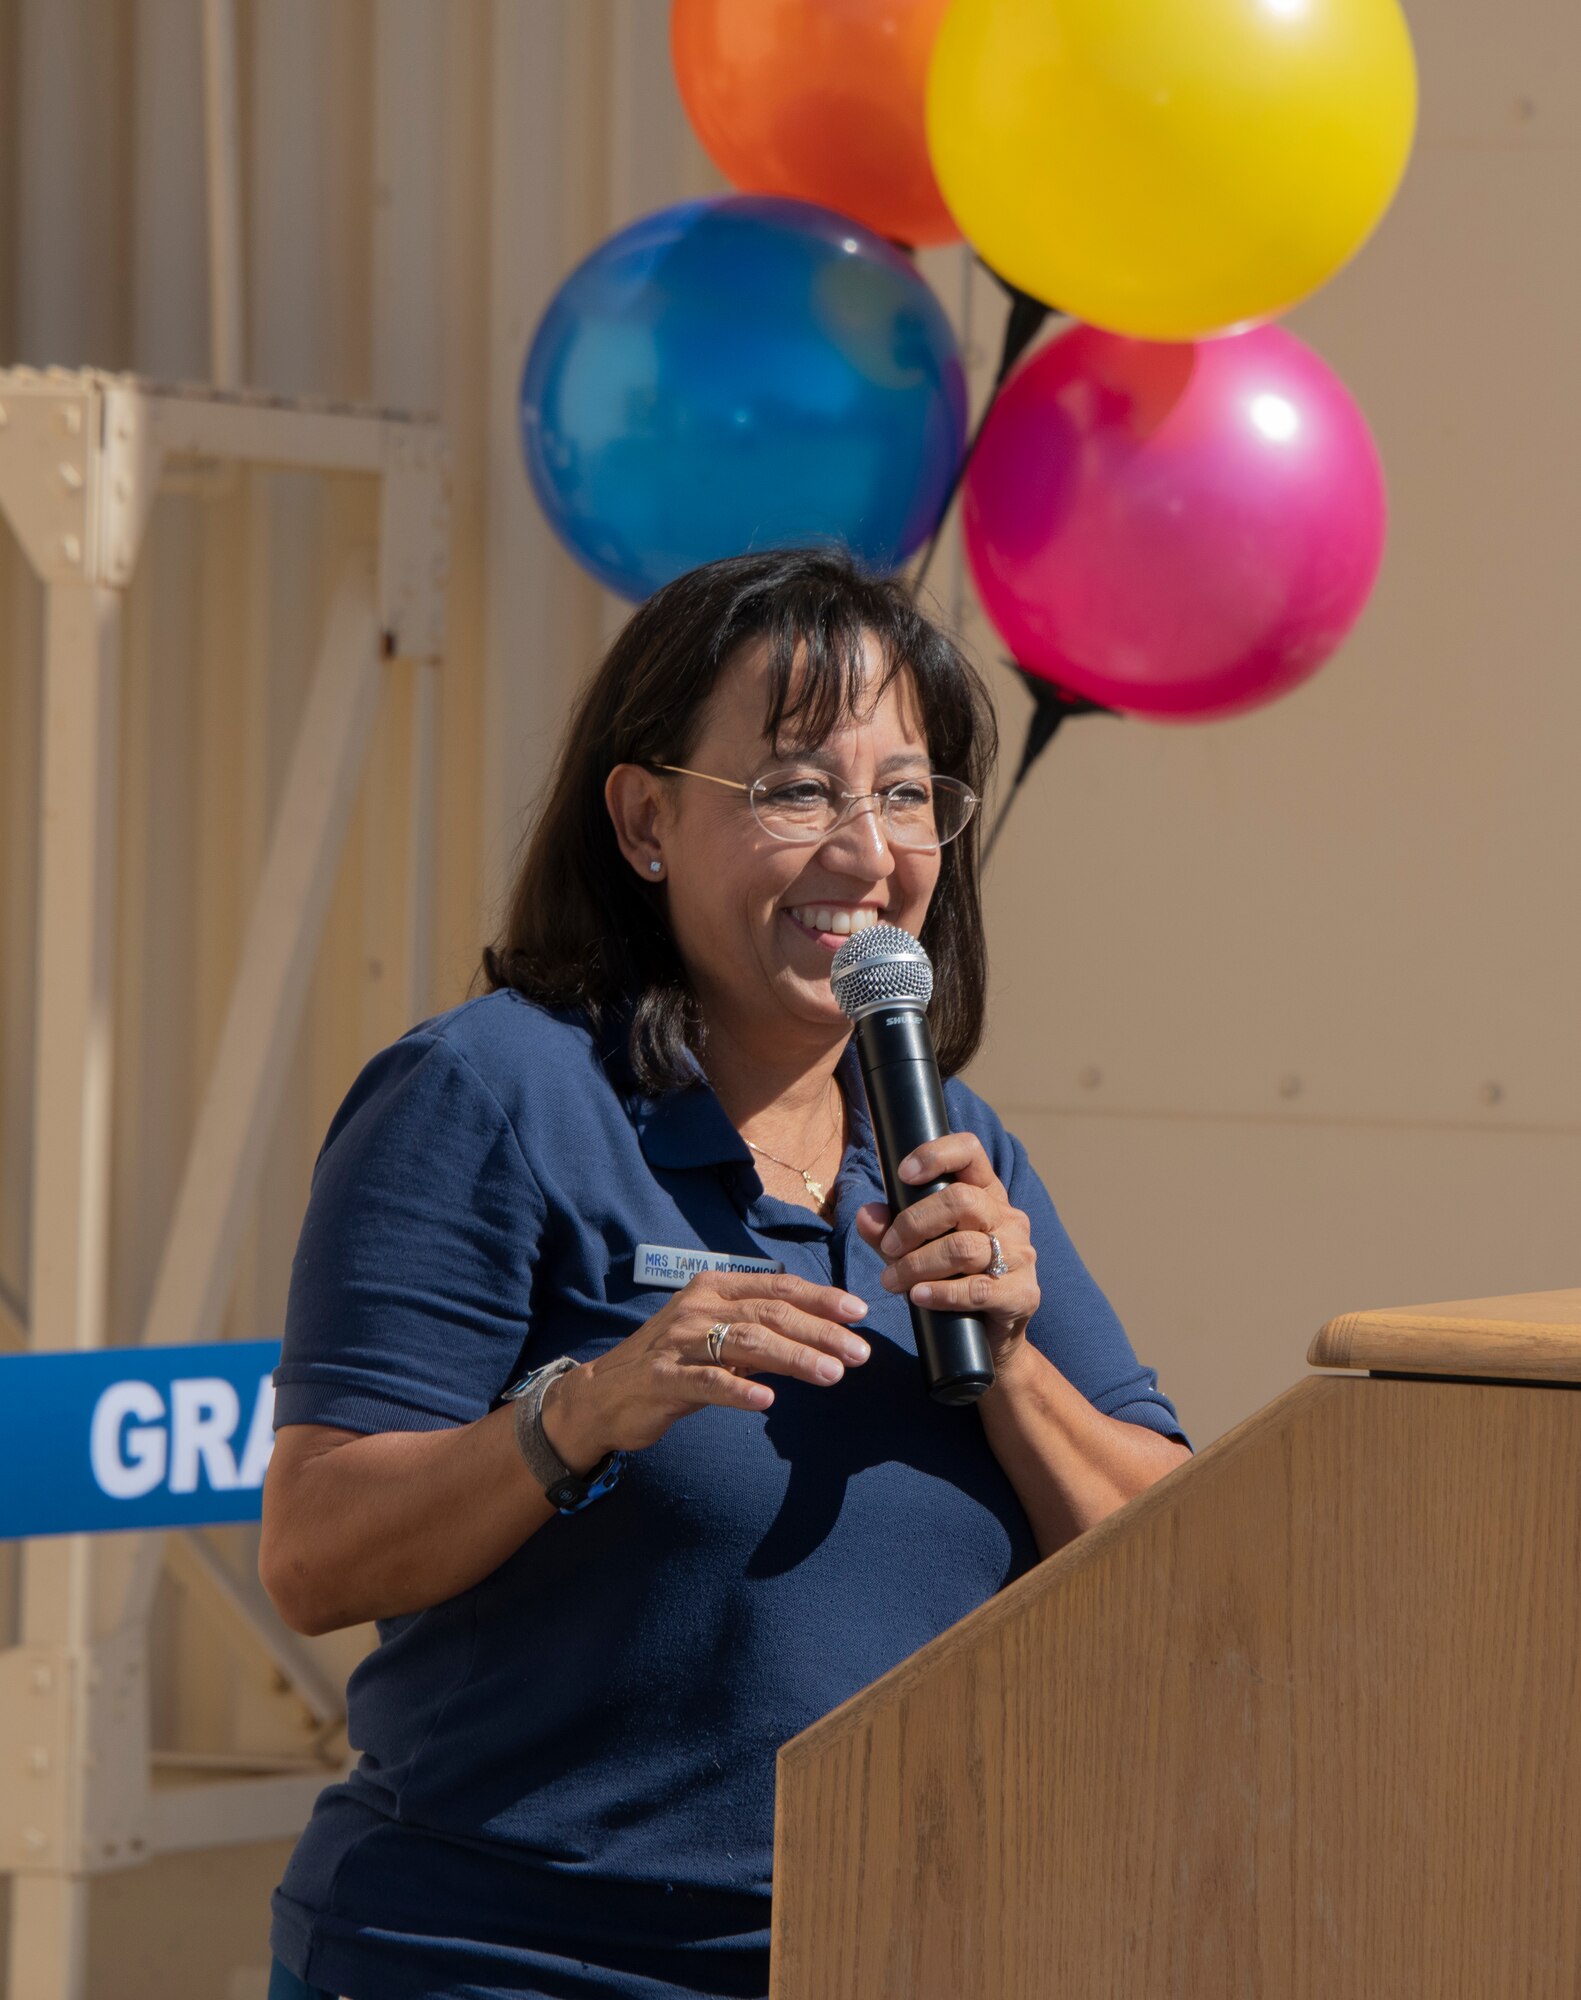 Tanya McCormick, 60th Force Support Squadron fitness and sports center manager, delivers her remarks during the ribbon cutting ceremony of the Nose Dock Gym Oct. 15, 2019, at Travis Air Force Base, California. The new gym at Building 844 was facilitated through existing base funds, equipment donations and volunteer work by the 60th Mission Support Group. (U.S. Air Force photo by Heide Couch)